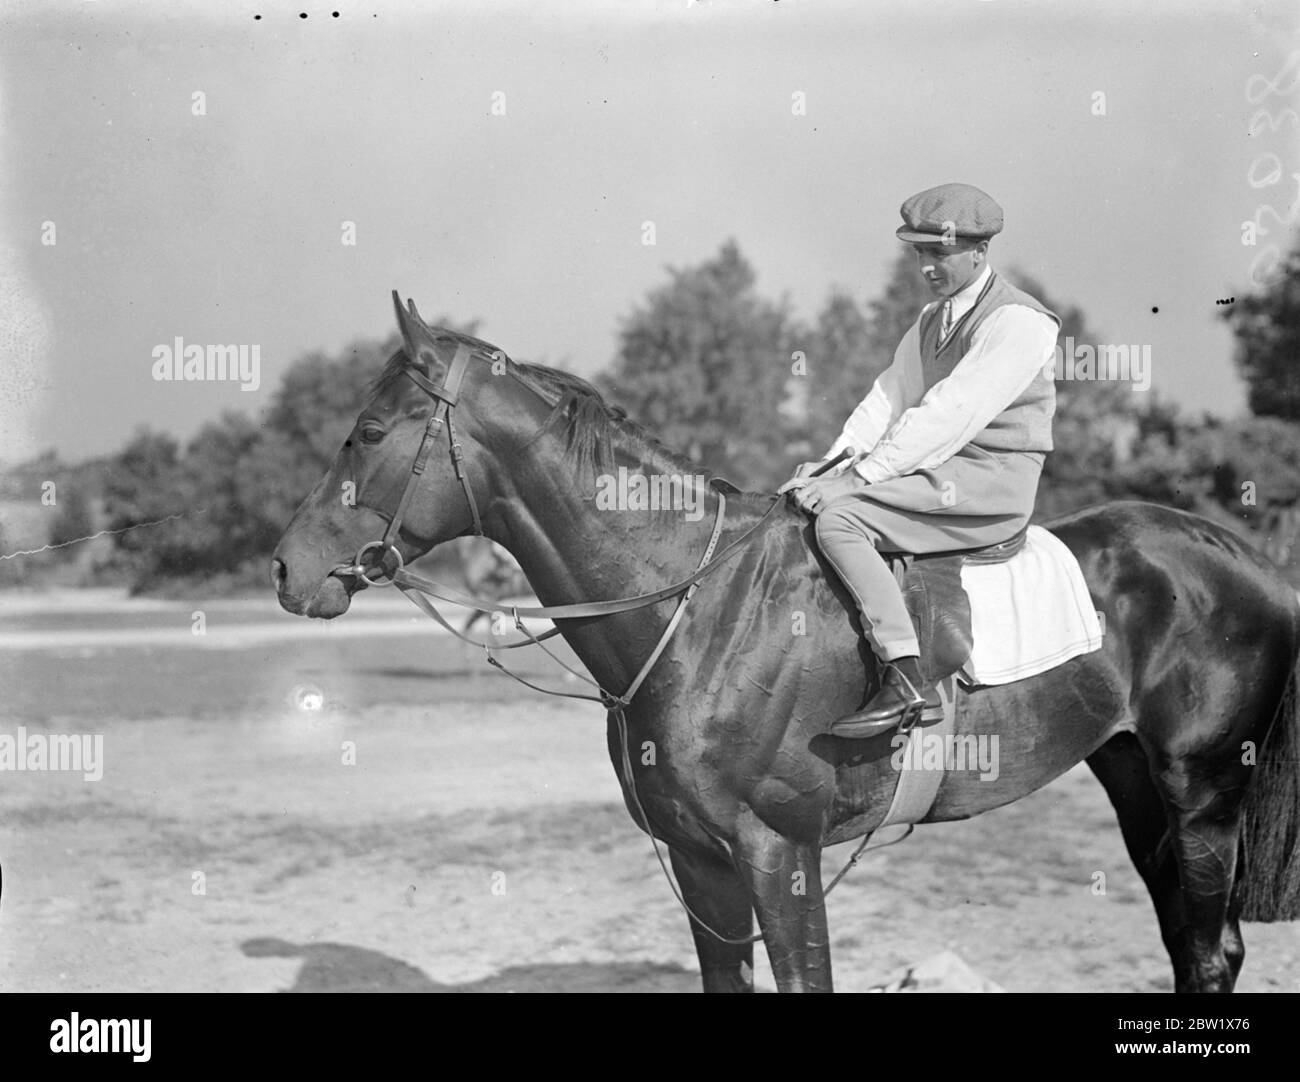 Derby candidate has gallop on Epsom Downs. Scarlet Plume, owned by Mr Robin McAlpine, was among the Derby candidates who went for a gallop on the Downs at Epsom in preparation for Wednesday's big race. Scarlet Plume is trained at Epsom by V Smyth. Photo shows, Scarlet Plume at Epsom. 31 May 1937 Stock Photo